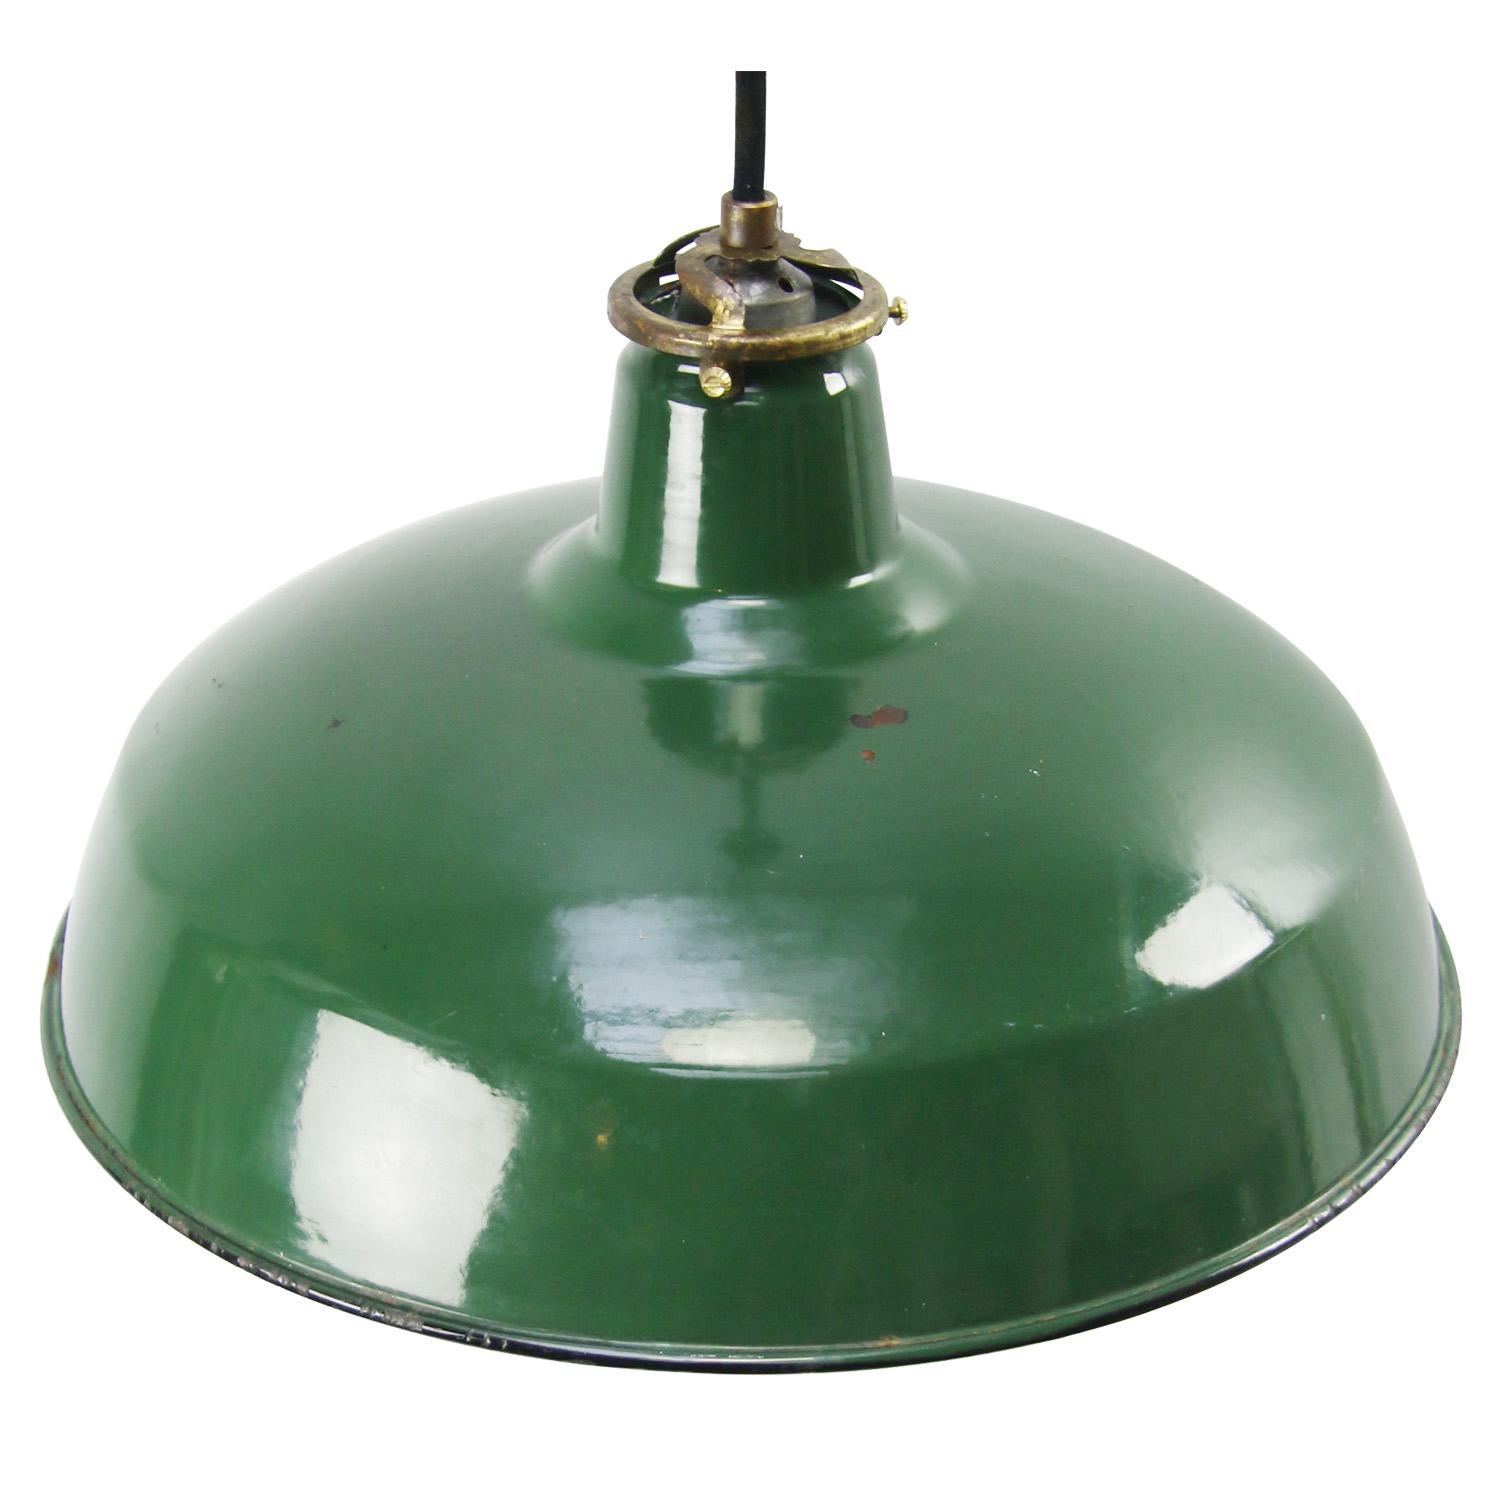 Vintage American Industrial pendant made of green enamel with brass top.
white interior

Weight: 1.00 kg / 2.2 lb

Priced per individual item. All lamps have been made suitable by international standards for incandescent light bulbs,